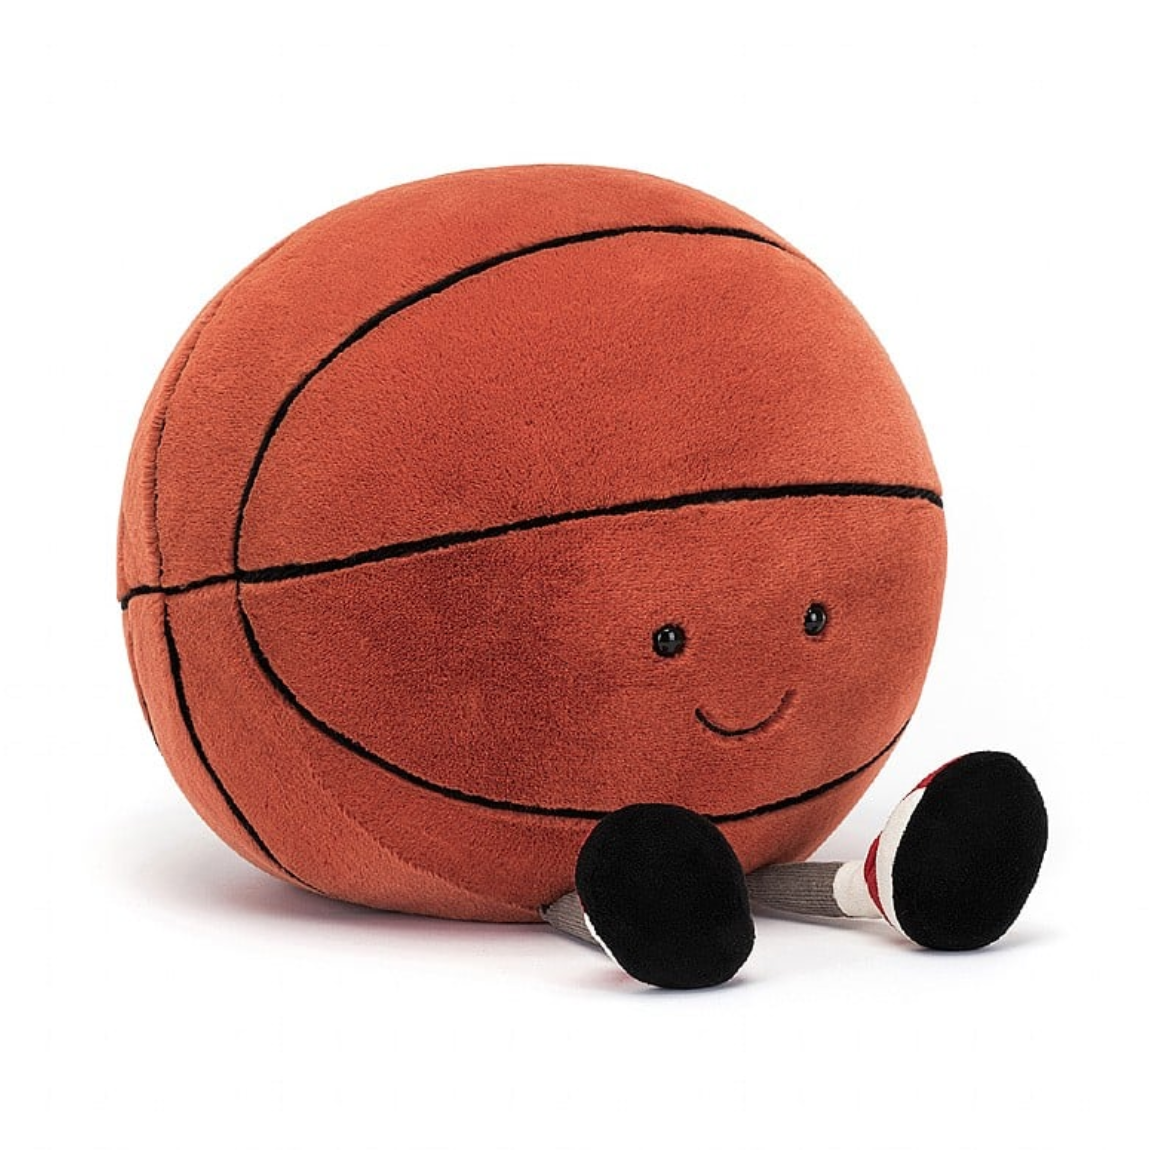 A plush toy designed to look like an Amuseable Basketball from Jelly Cat Inc., with arms and legs, sitting against a bungalow in Scottsdale, Arizona.